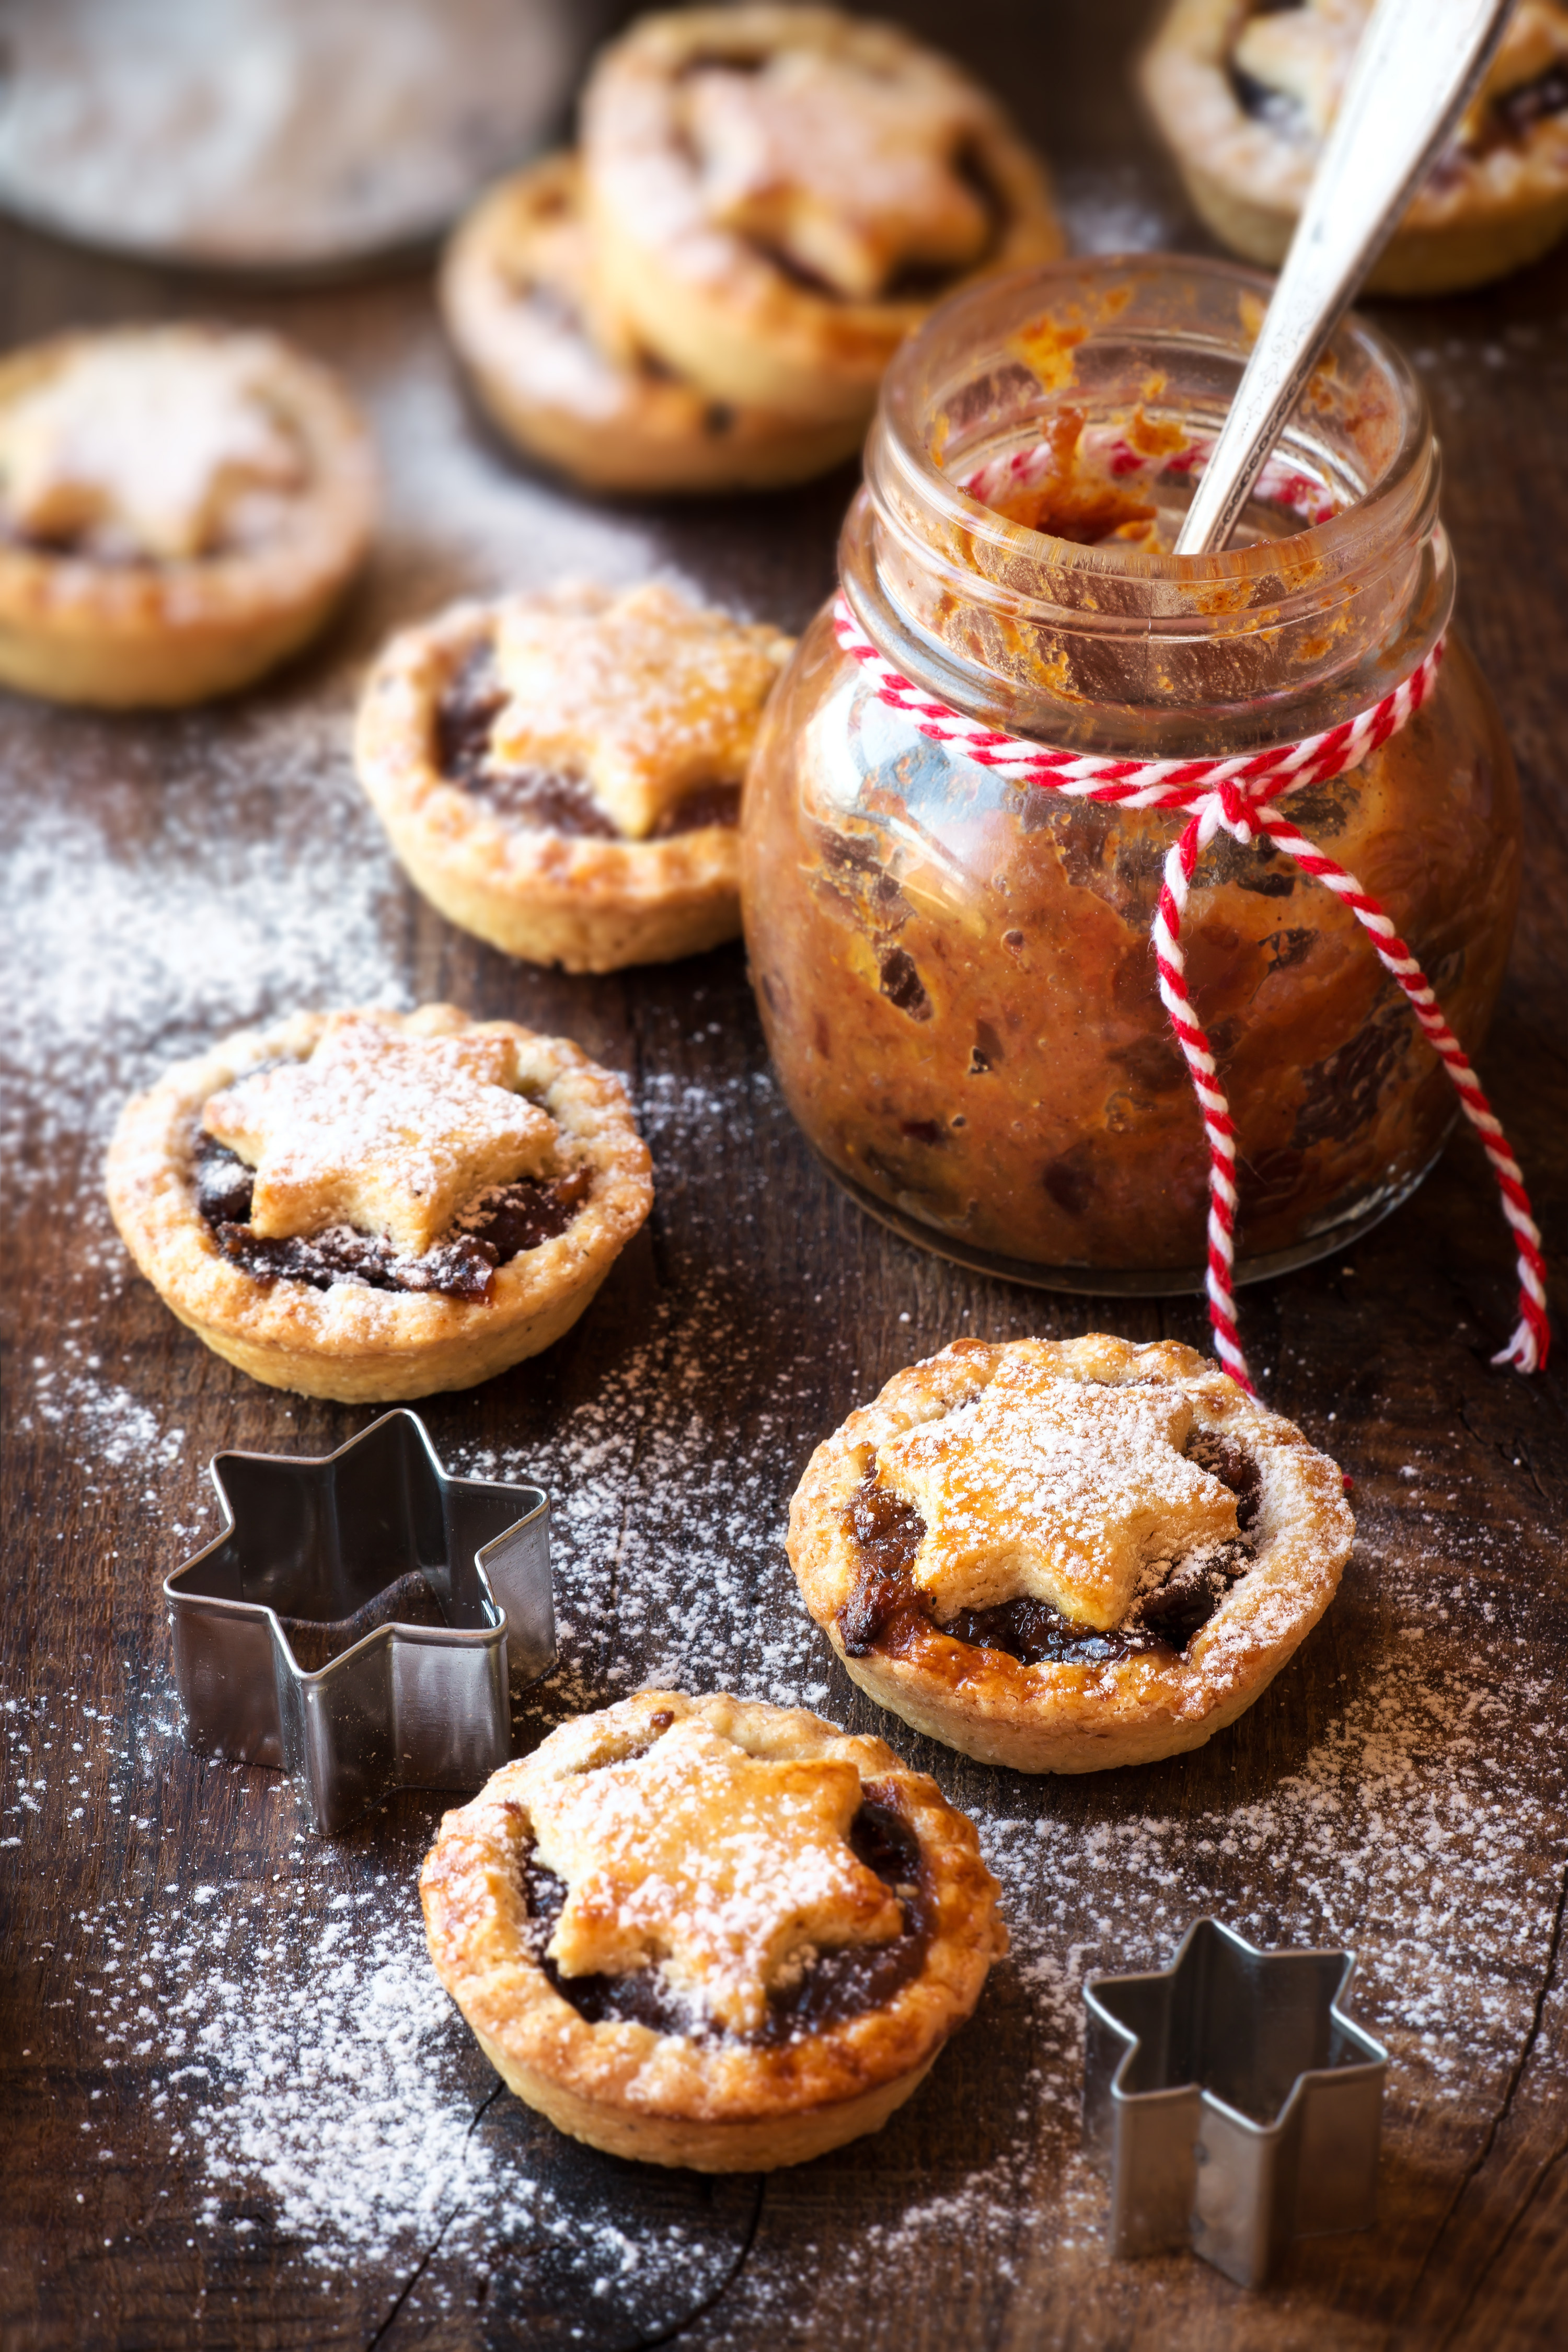 'Cheer' Mince Pies